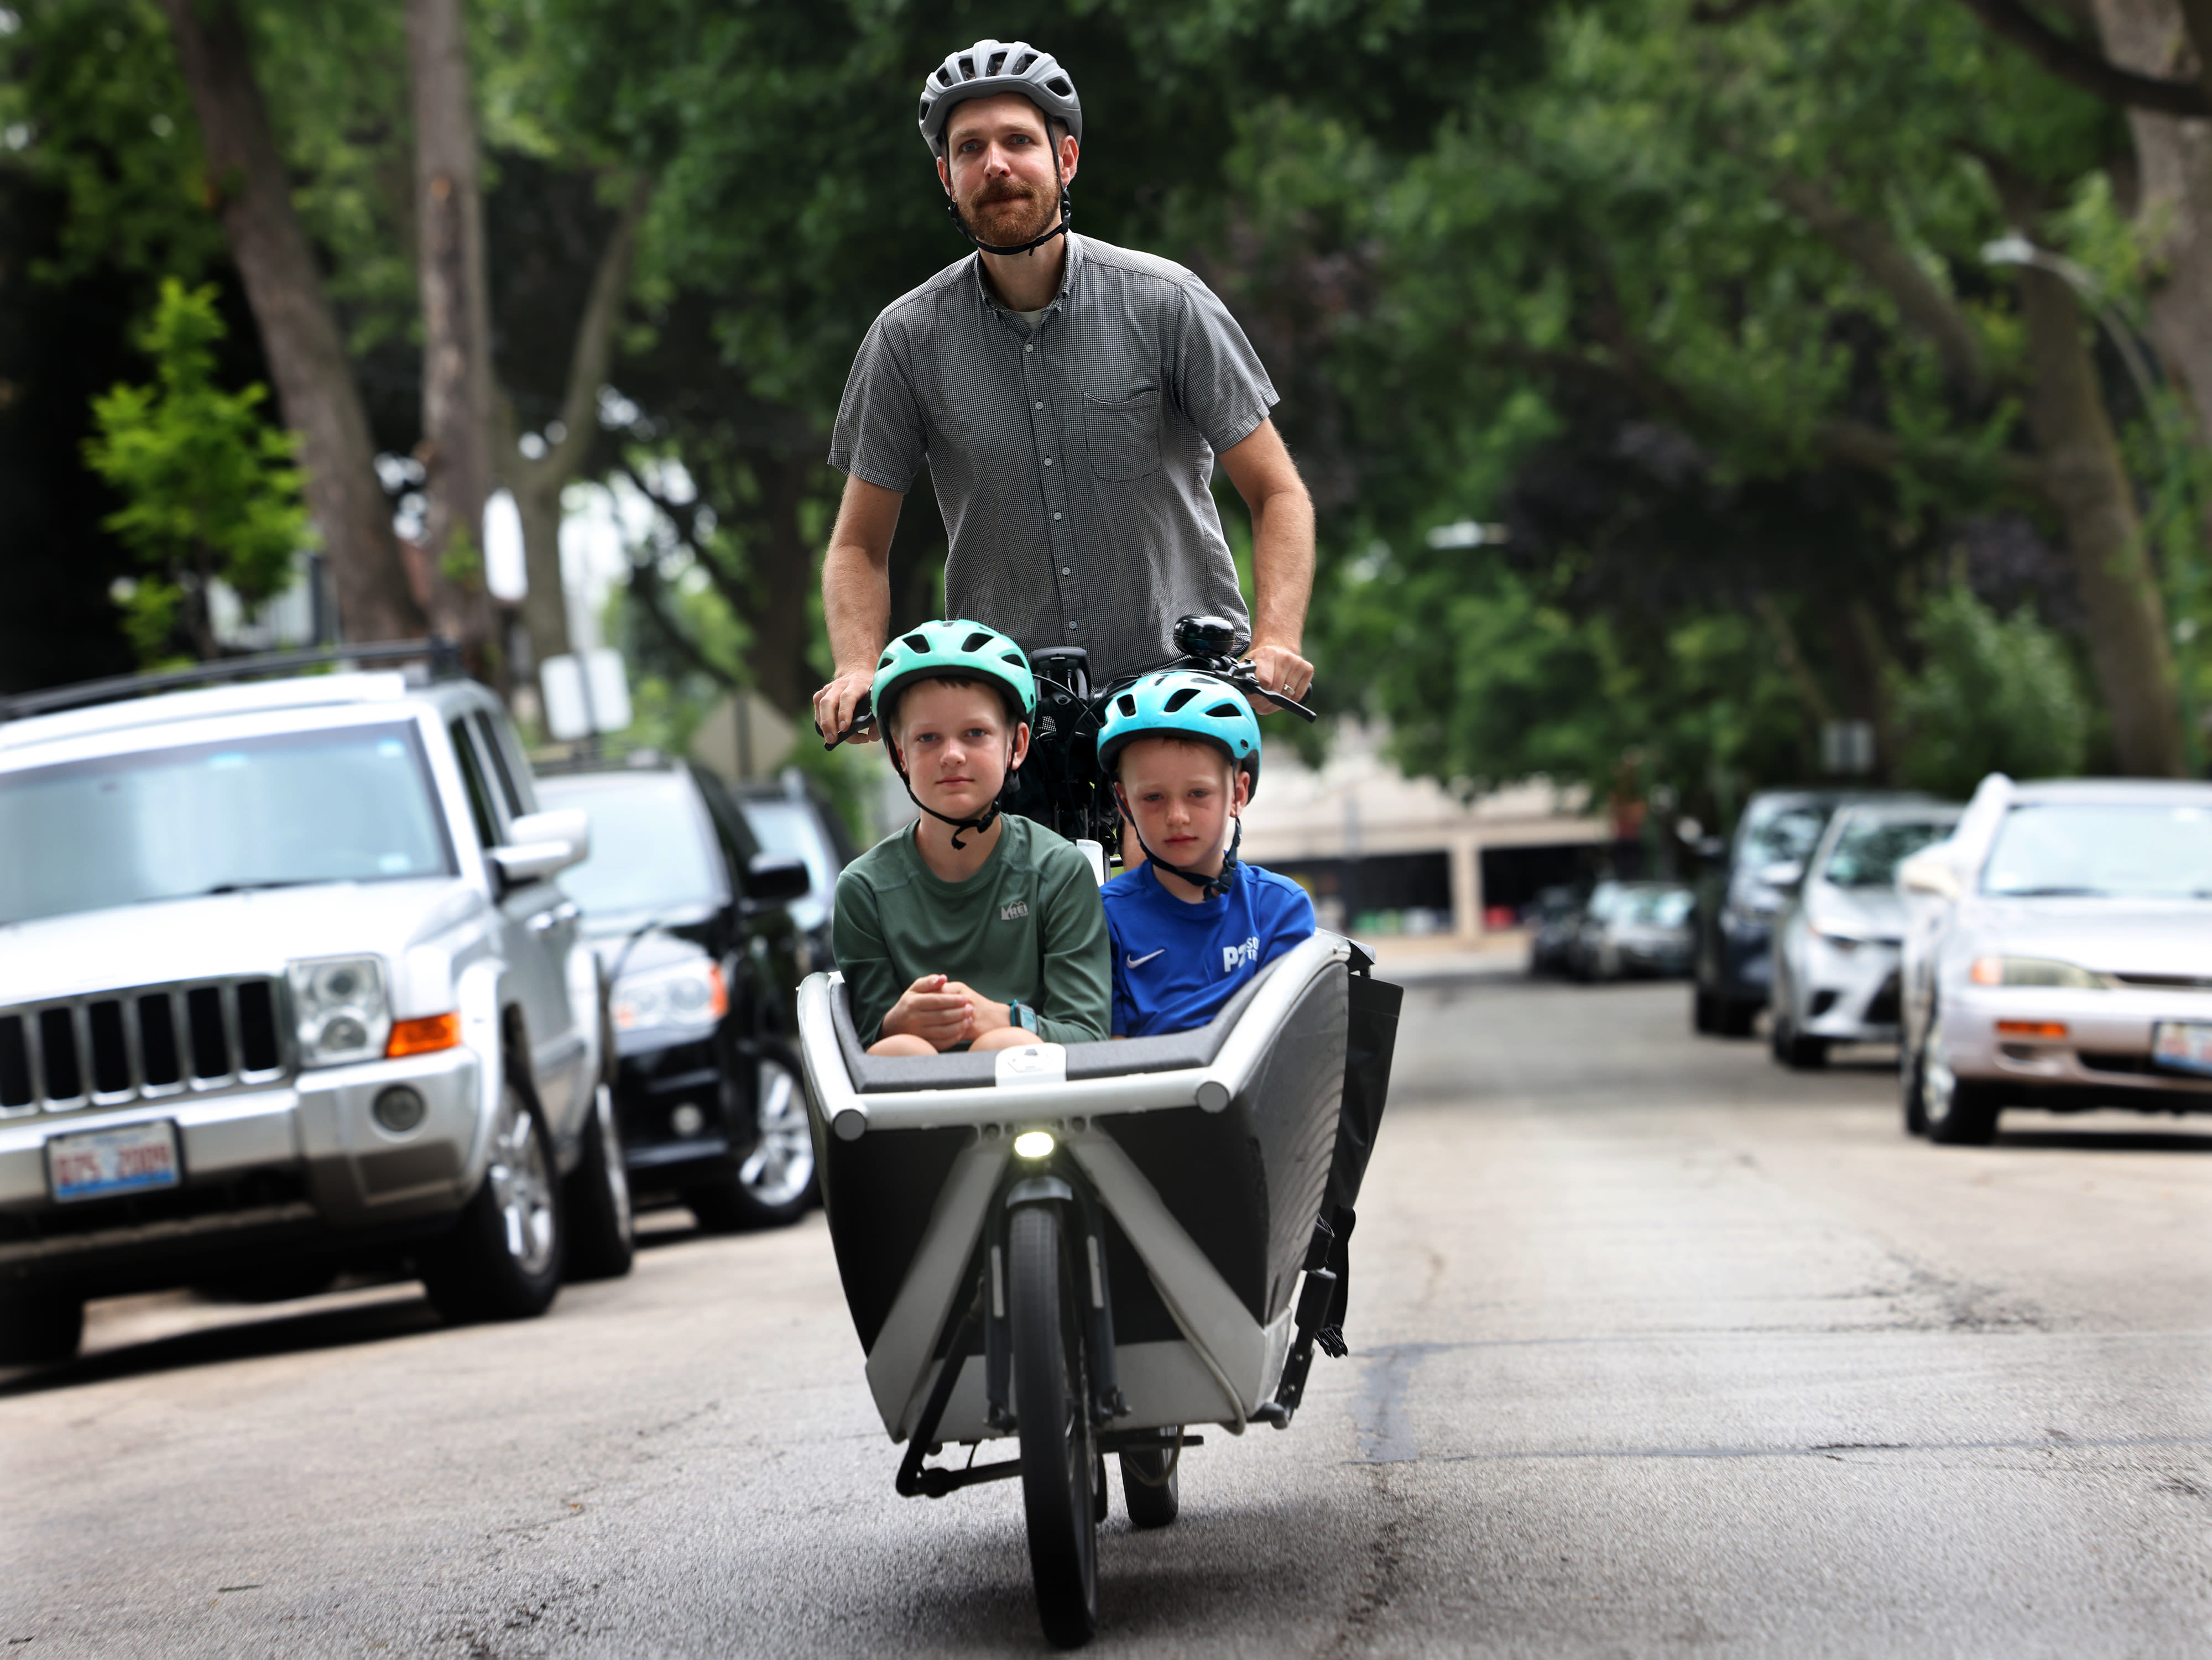 Forget upgrading the family car. These Chicago parents bought cargo bikes instead